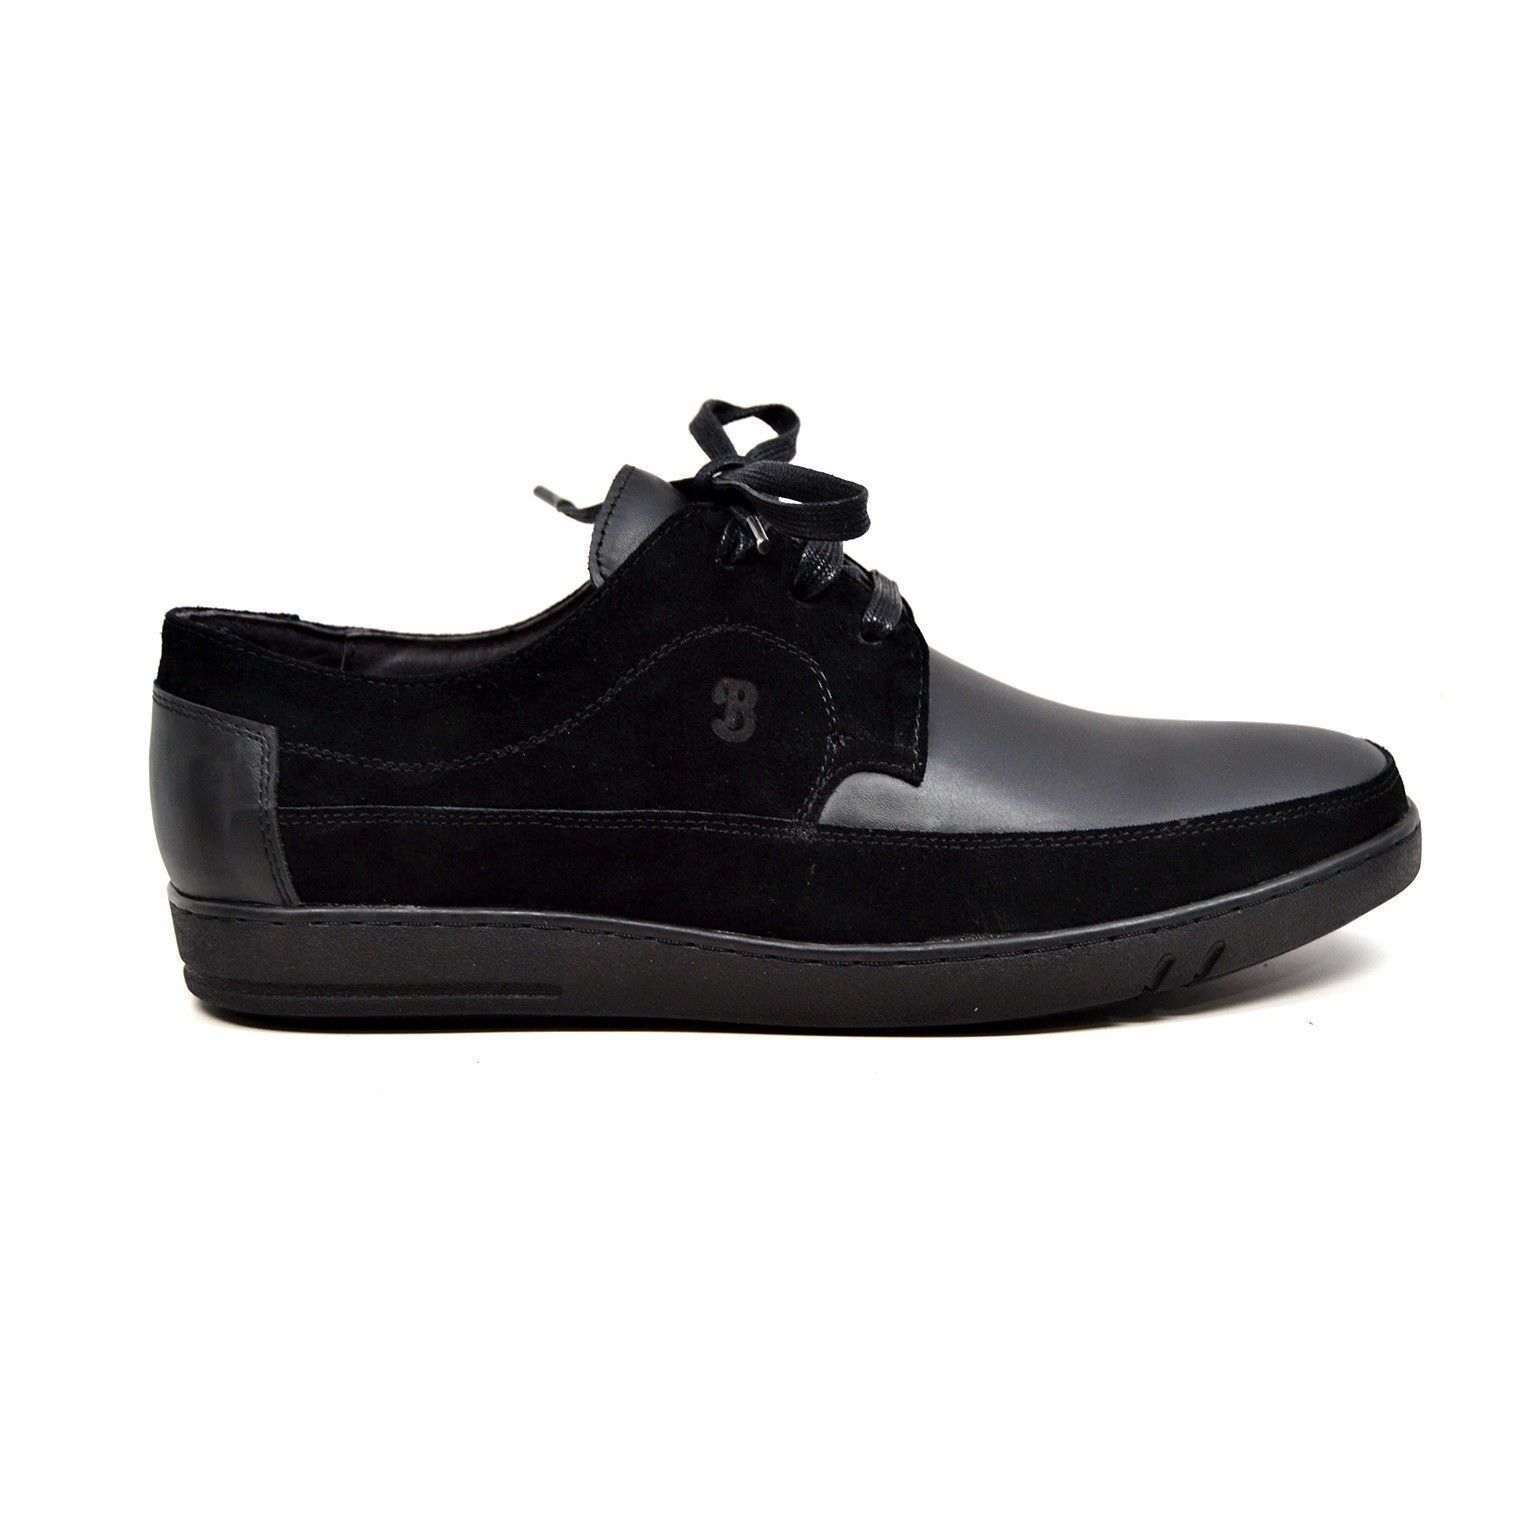 British Walkers Bally Style Men's Black Suede Oxfords - Casual Shoes